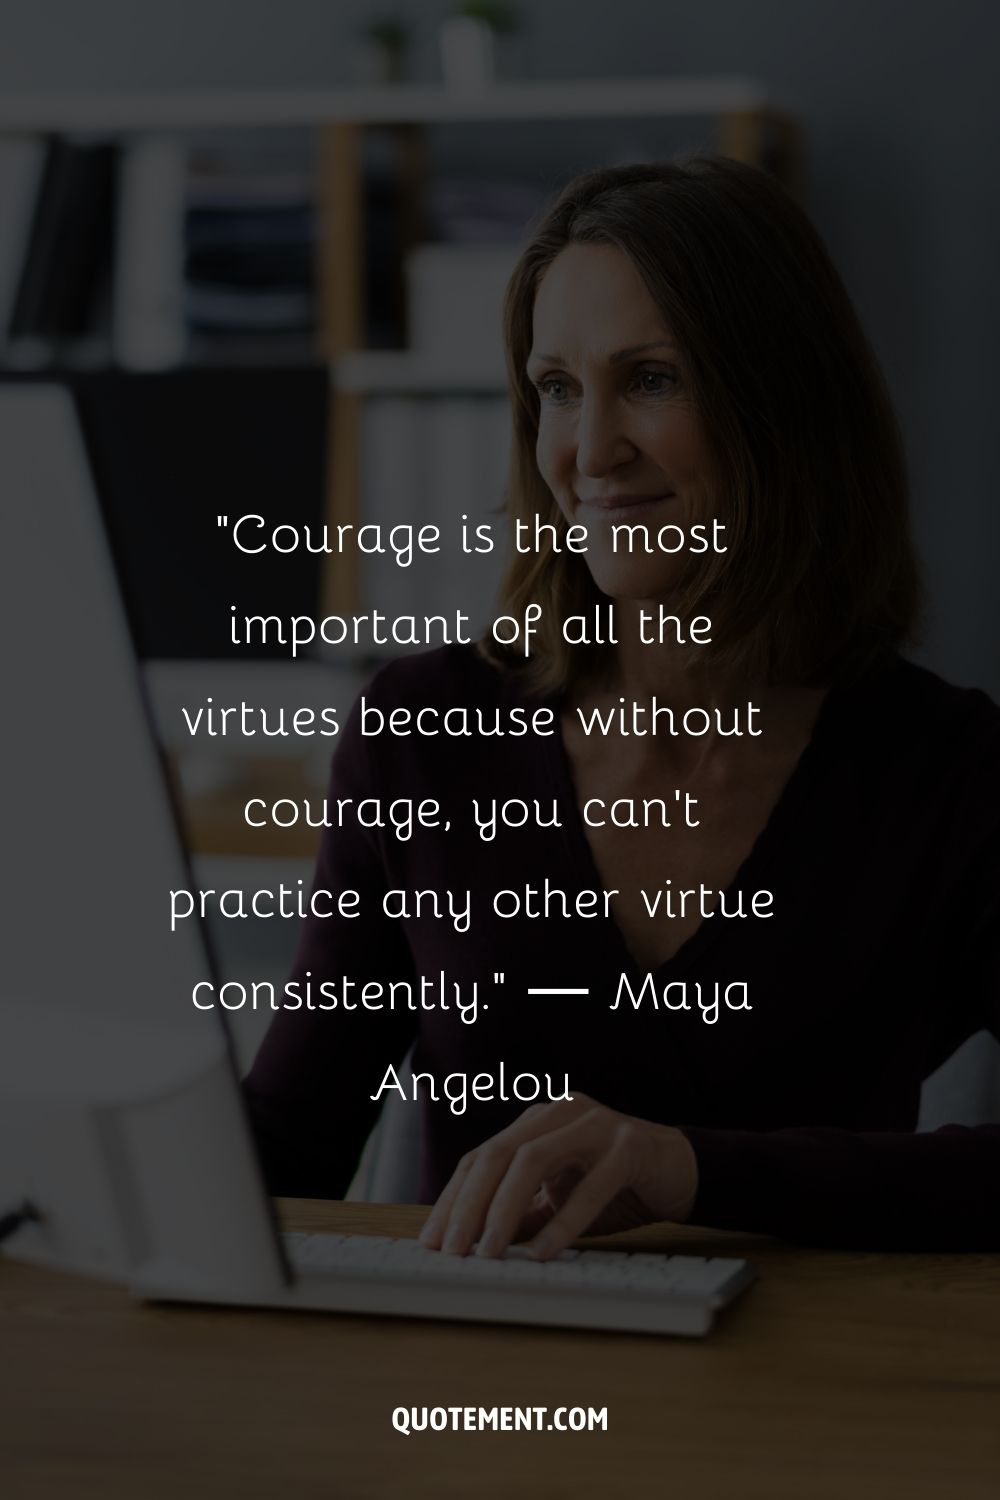 “Courage is the most important of all the virtues because without courage, you can't practice any other virtue consistently.” ― Maya Angelou